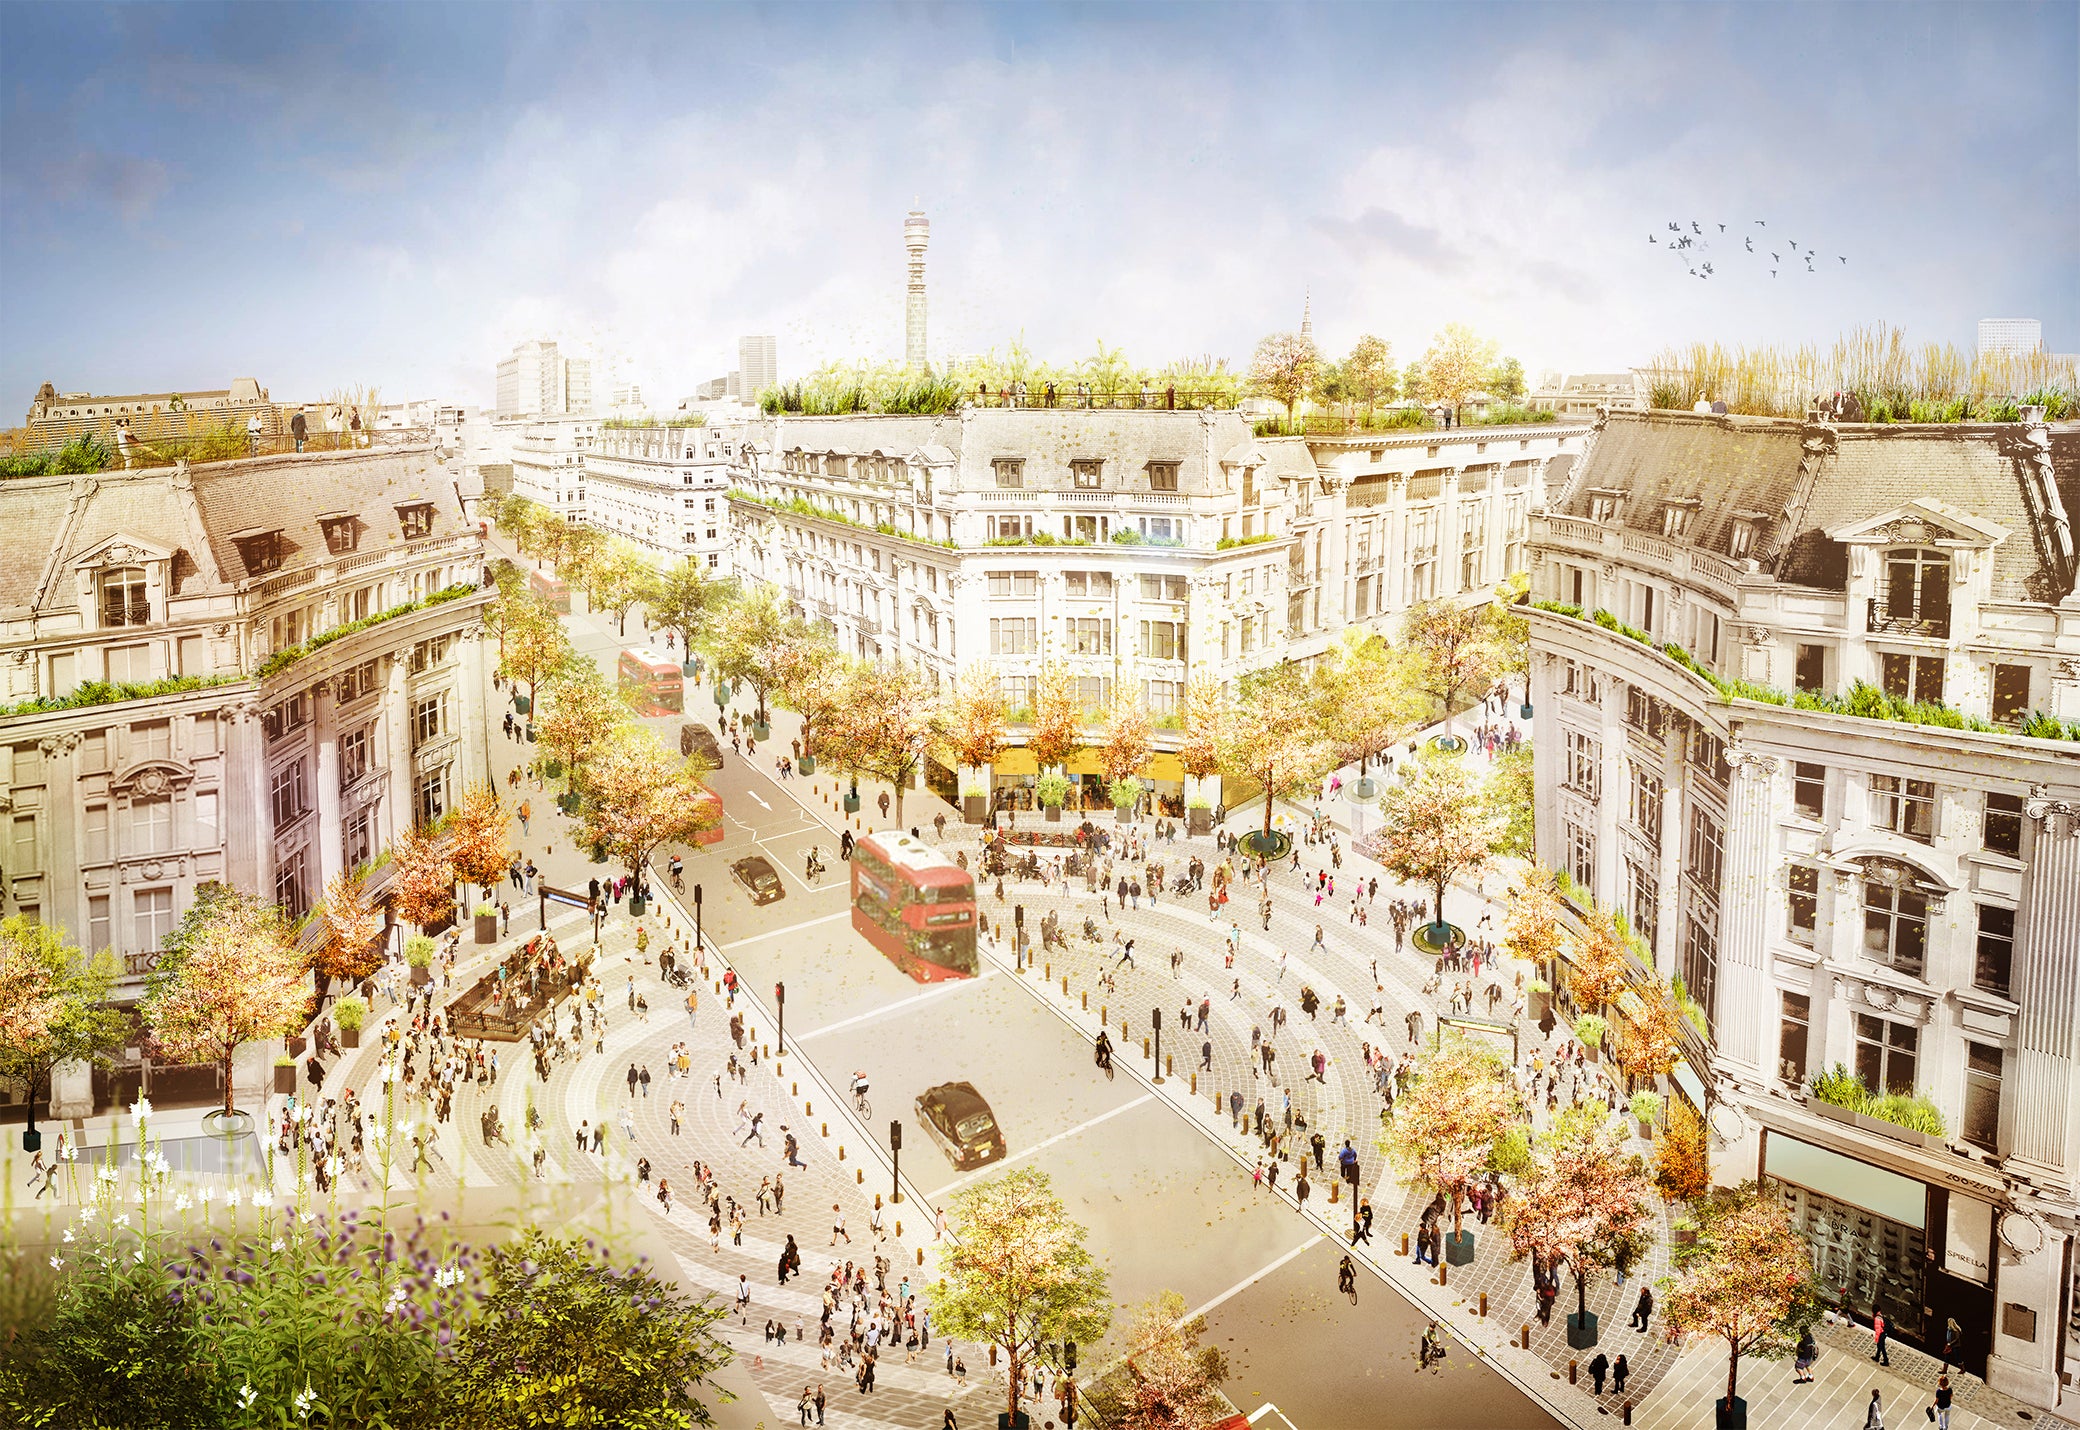 Artist impression showing future transformation of Oxford Circus with traffic continuing on Regent Street and two new piazzas on Oxford Street